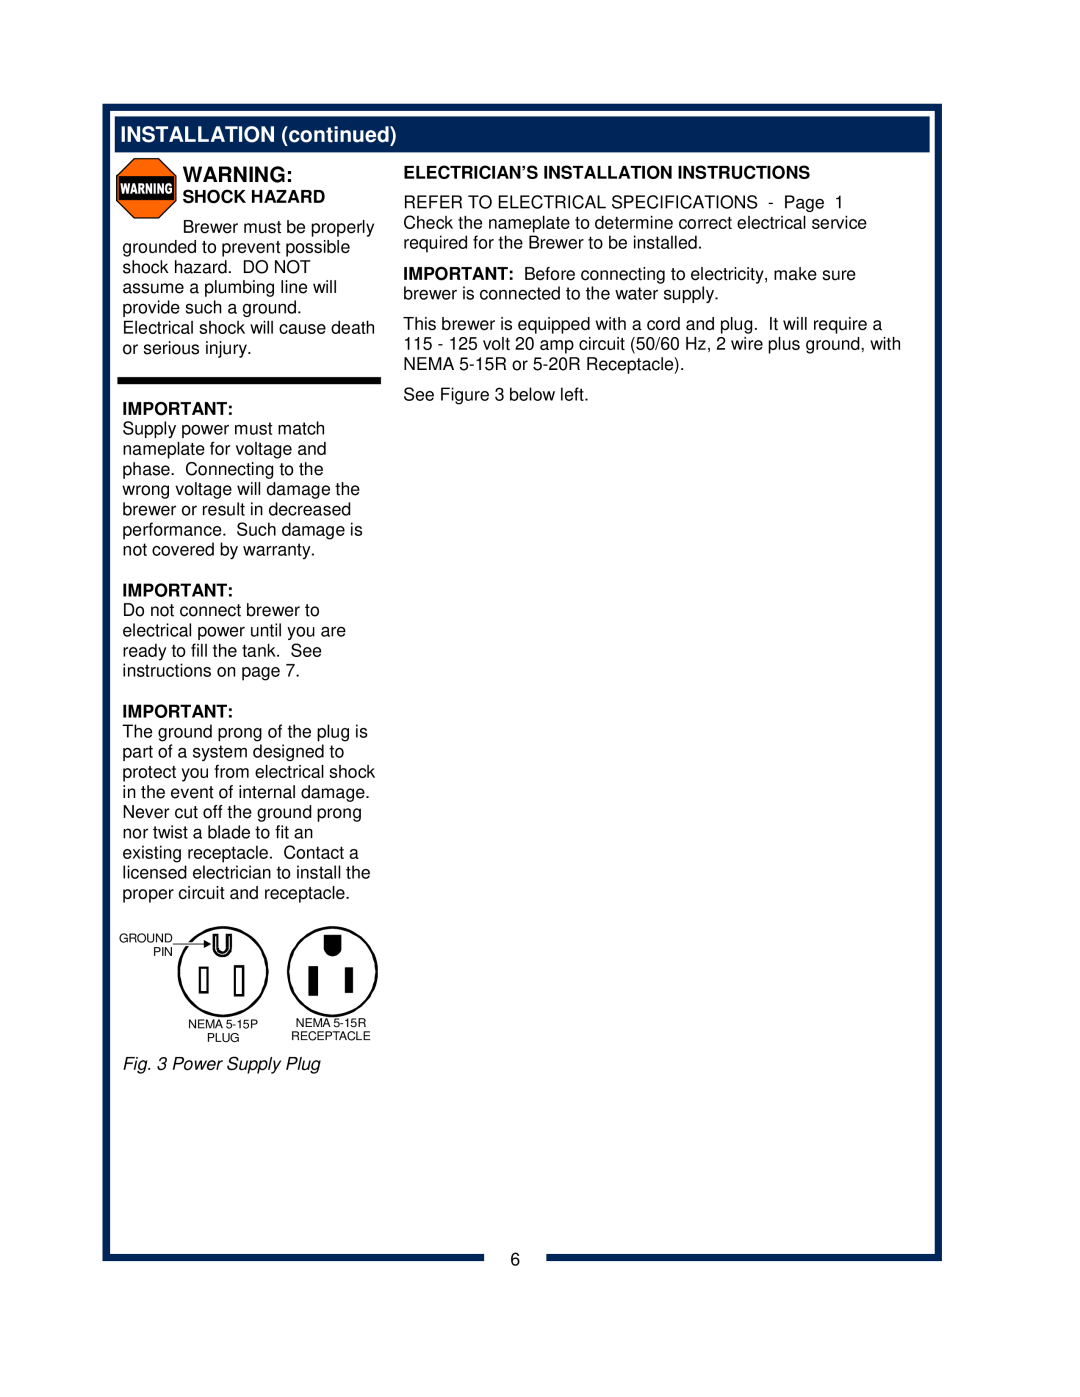 Bloomfield 9600 Single Cup owner manual INSTALLATION continued, Shock Hazard, Electrician’S Installation Instructions 